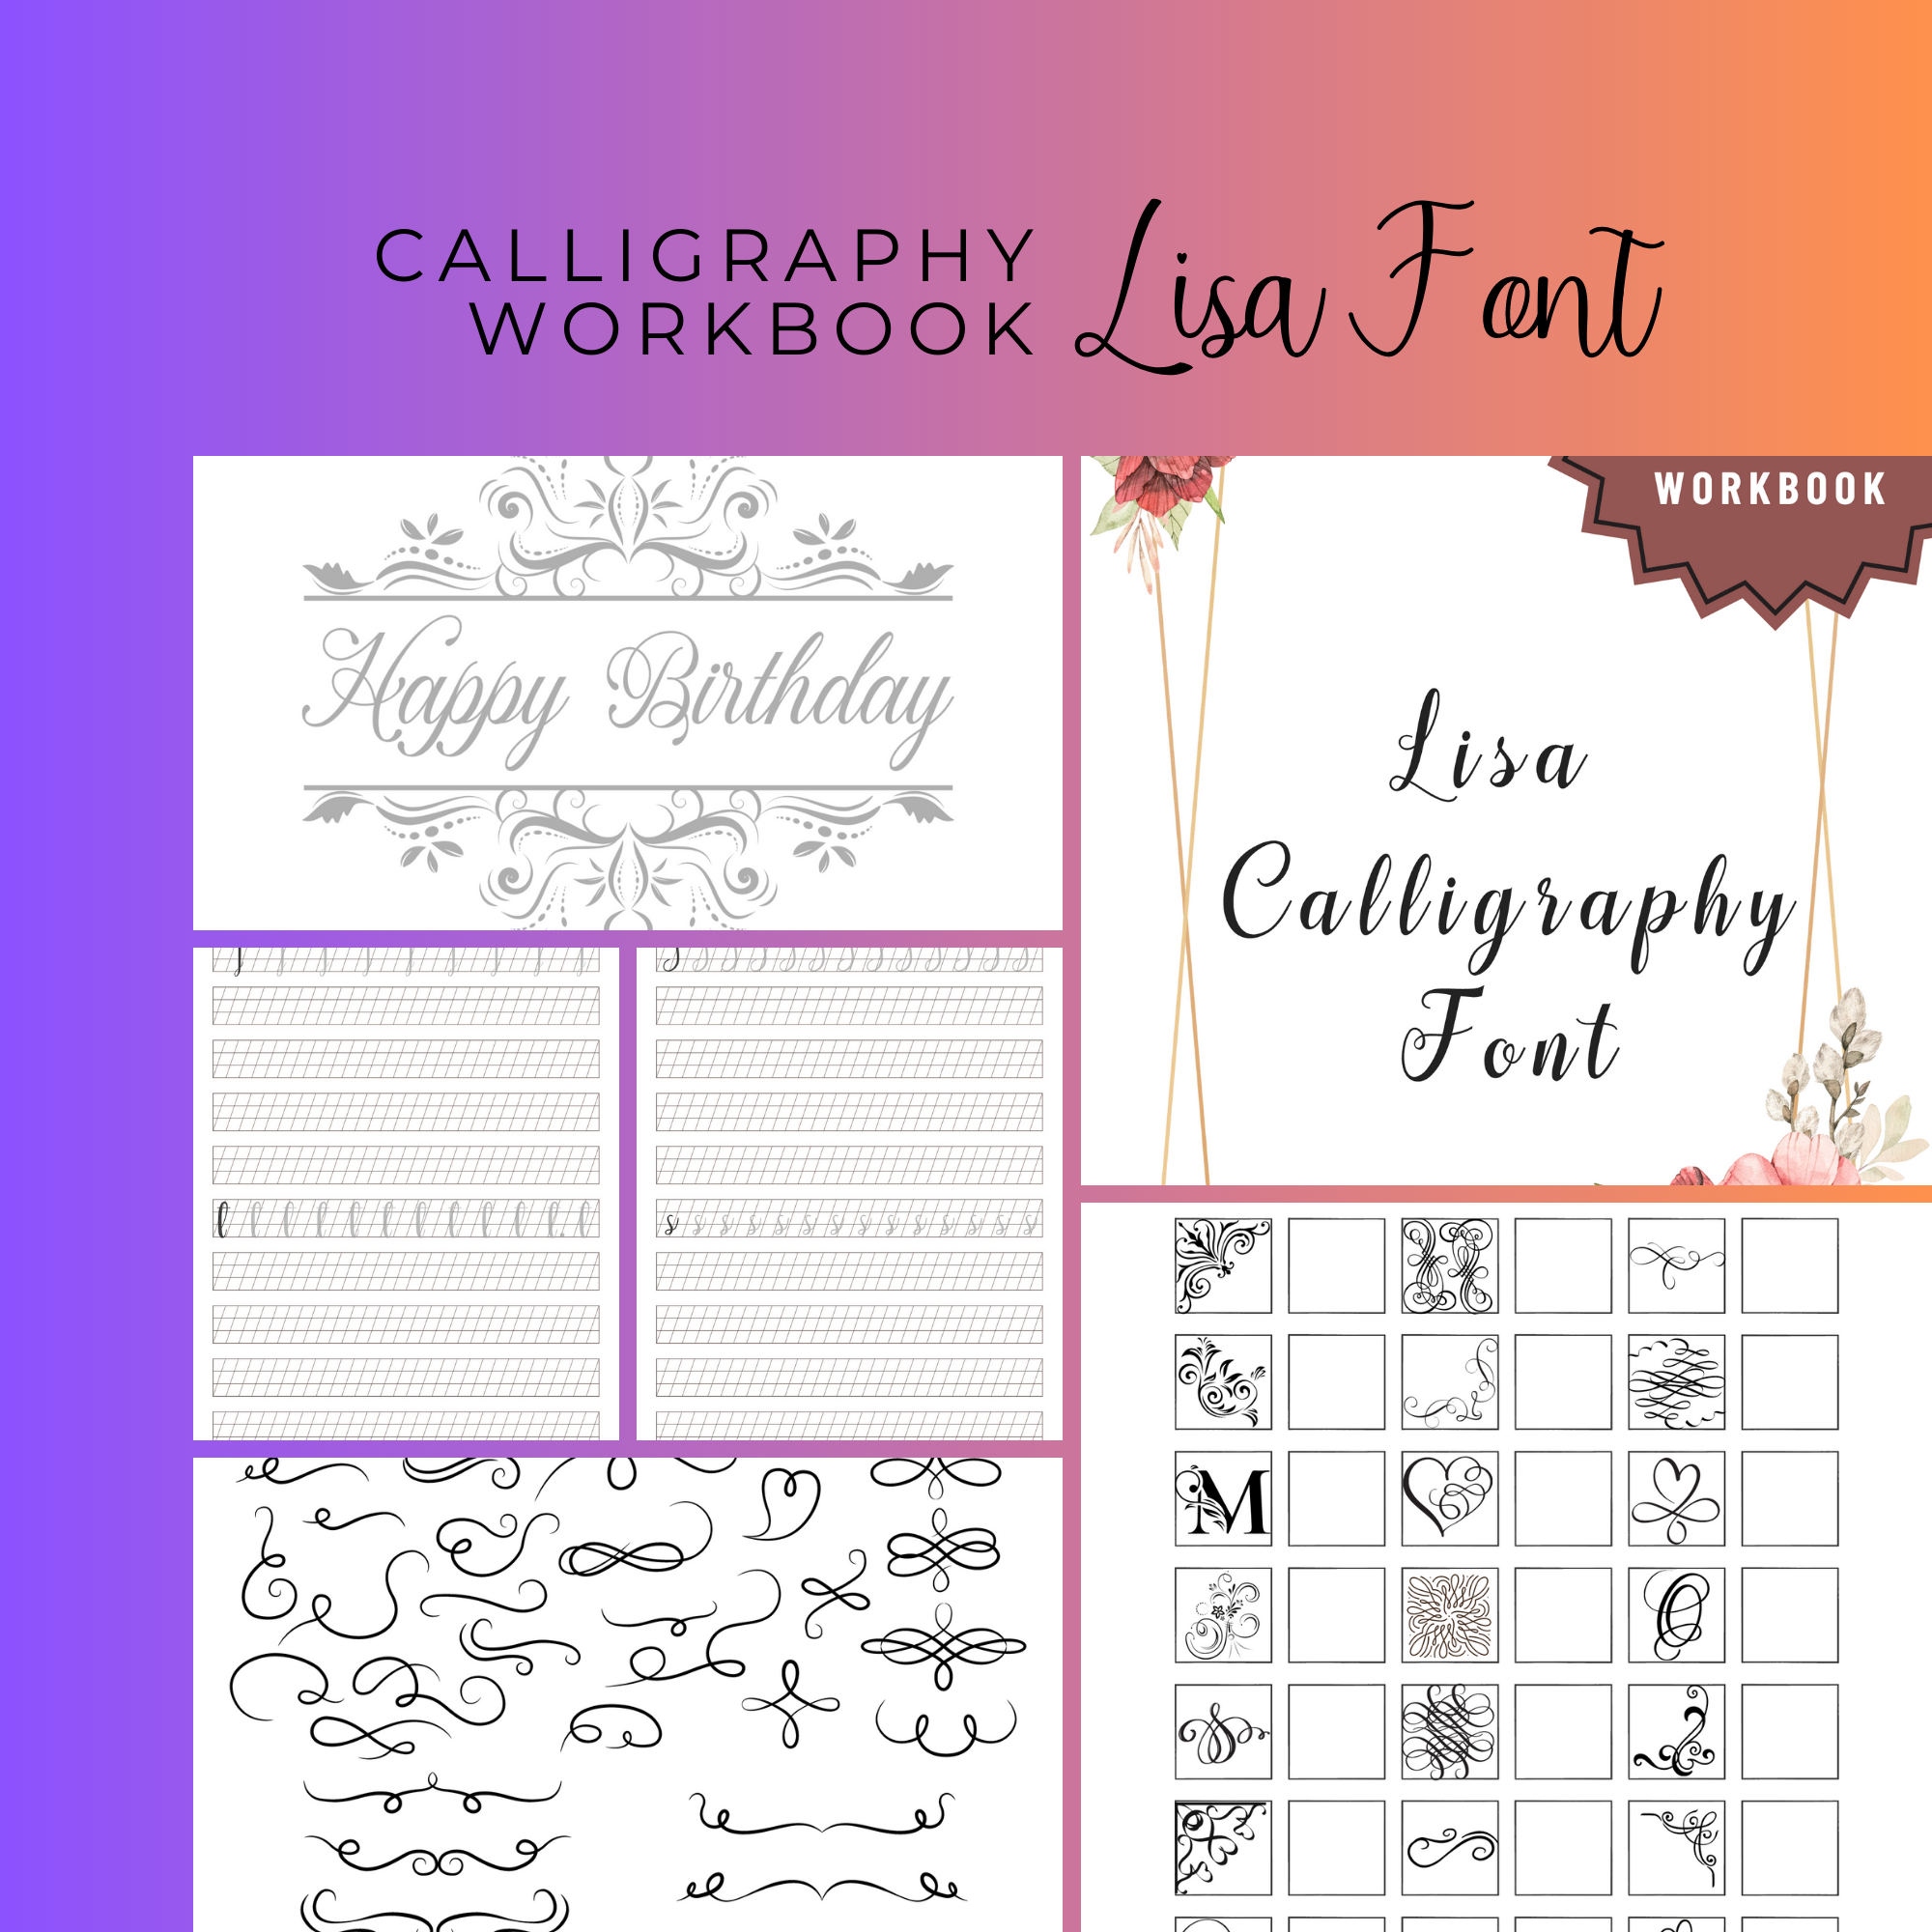 Marisol Font Calligraphy Workbook - Calligraphy Instructions